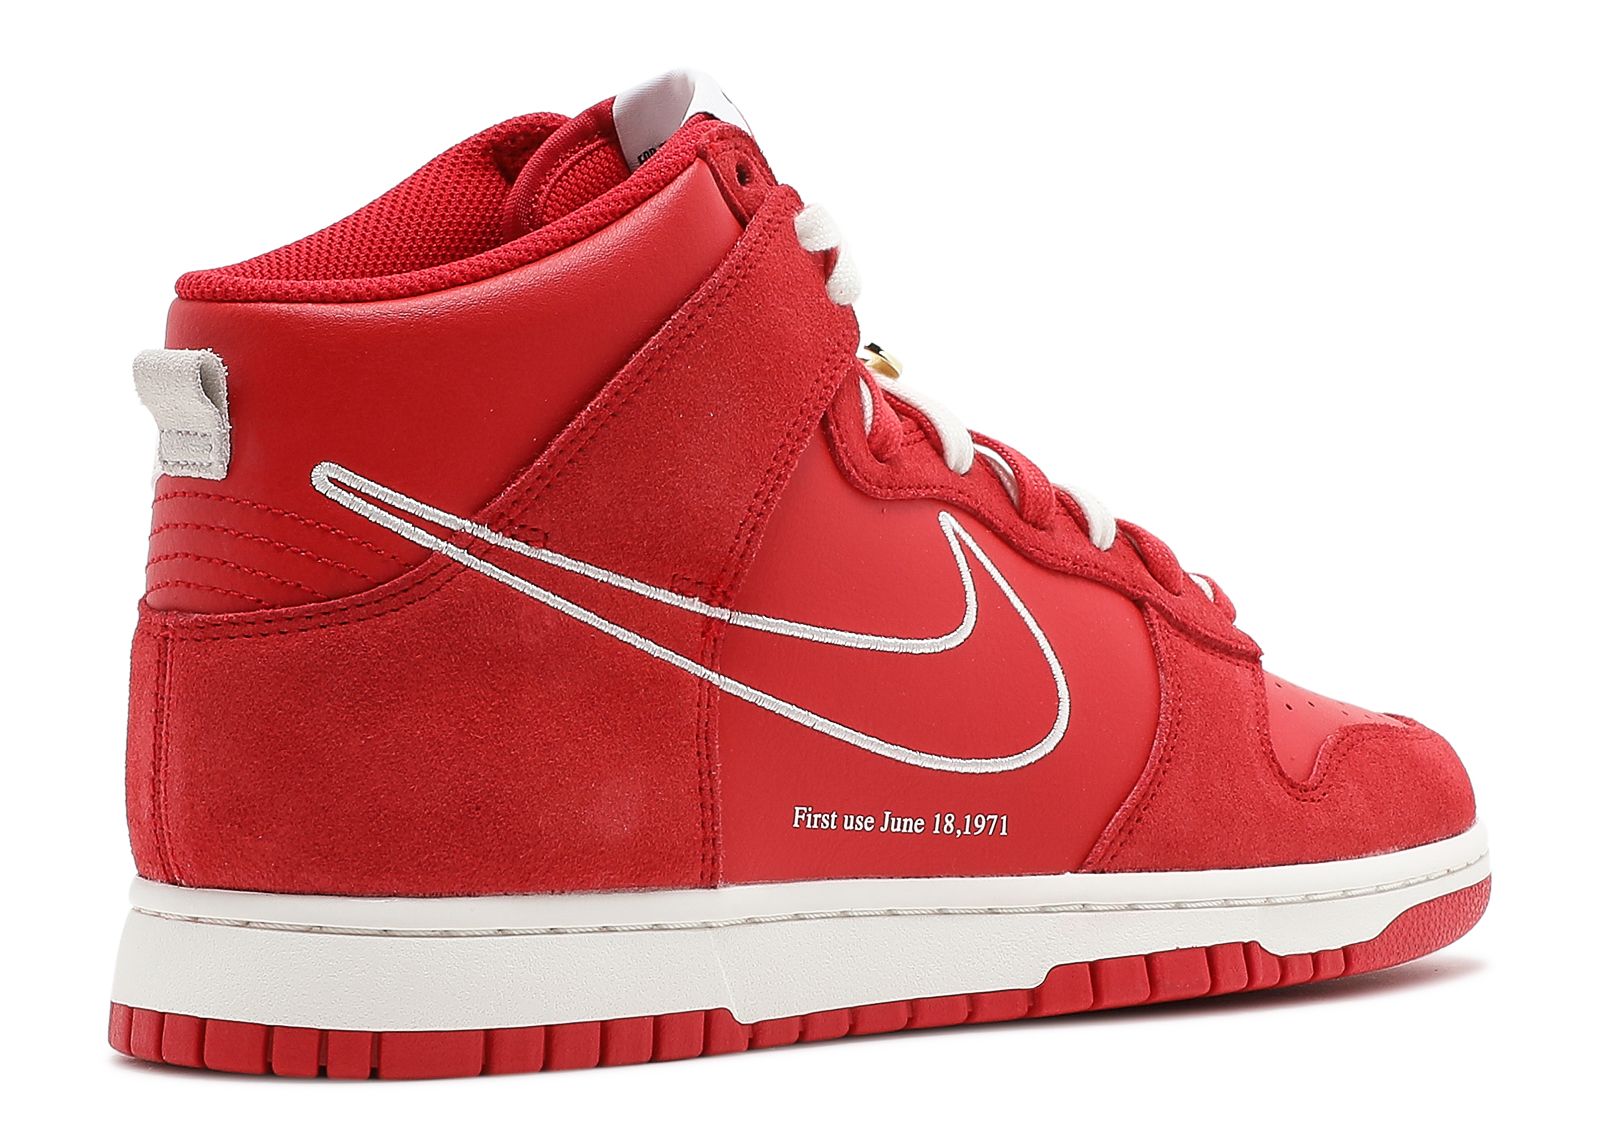 Dunk High SE 'First Use Pack University Red' - Nike - DH0960 600 